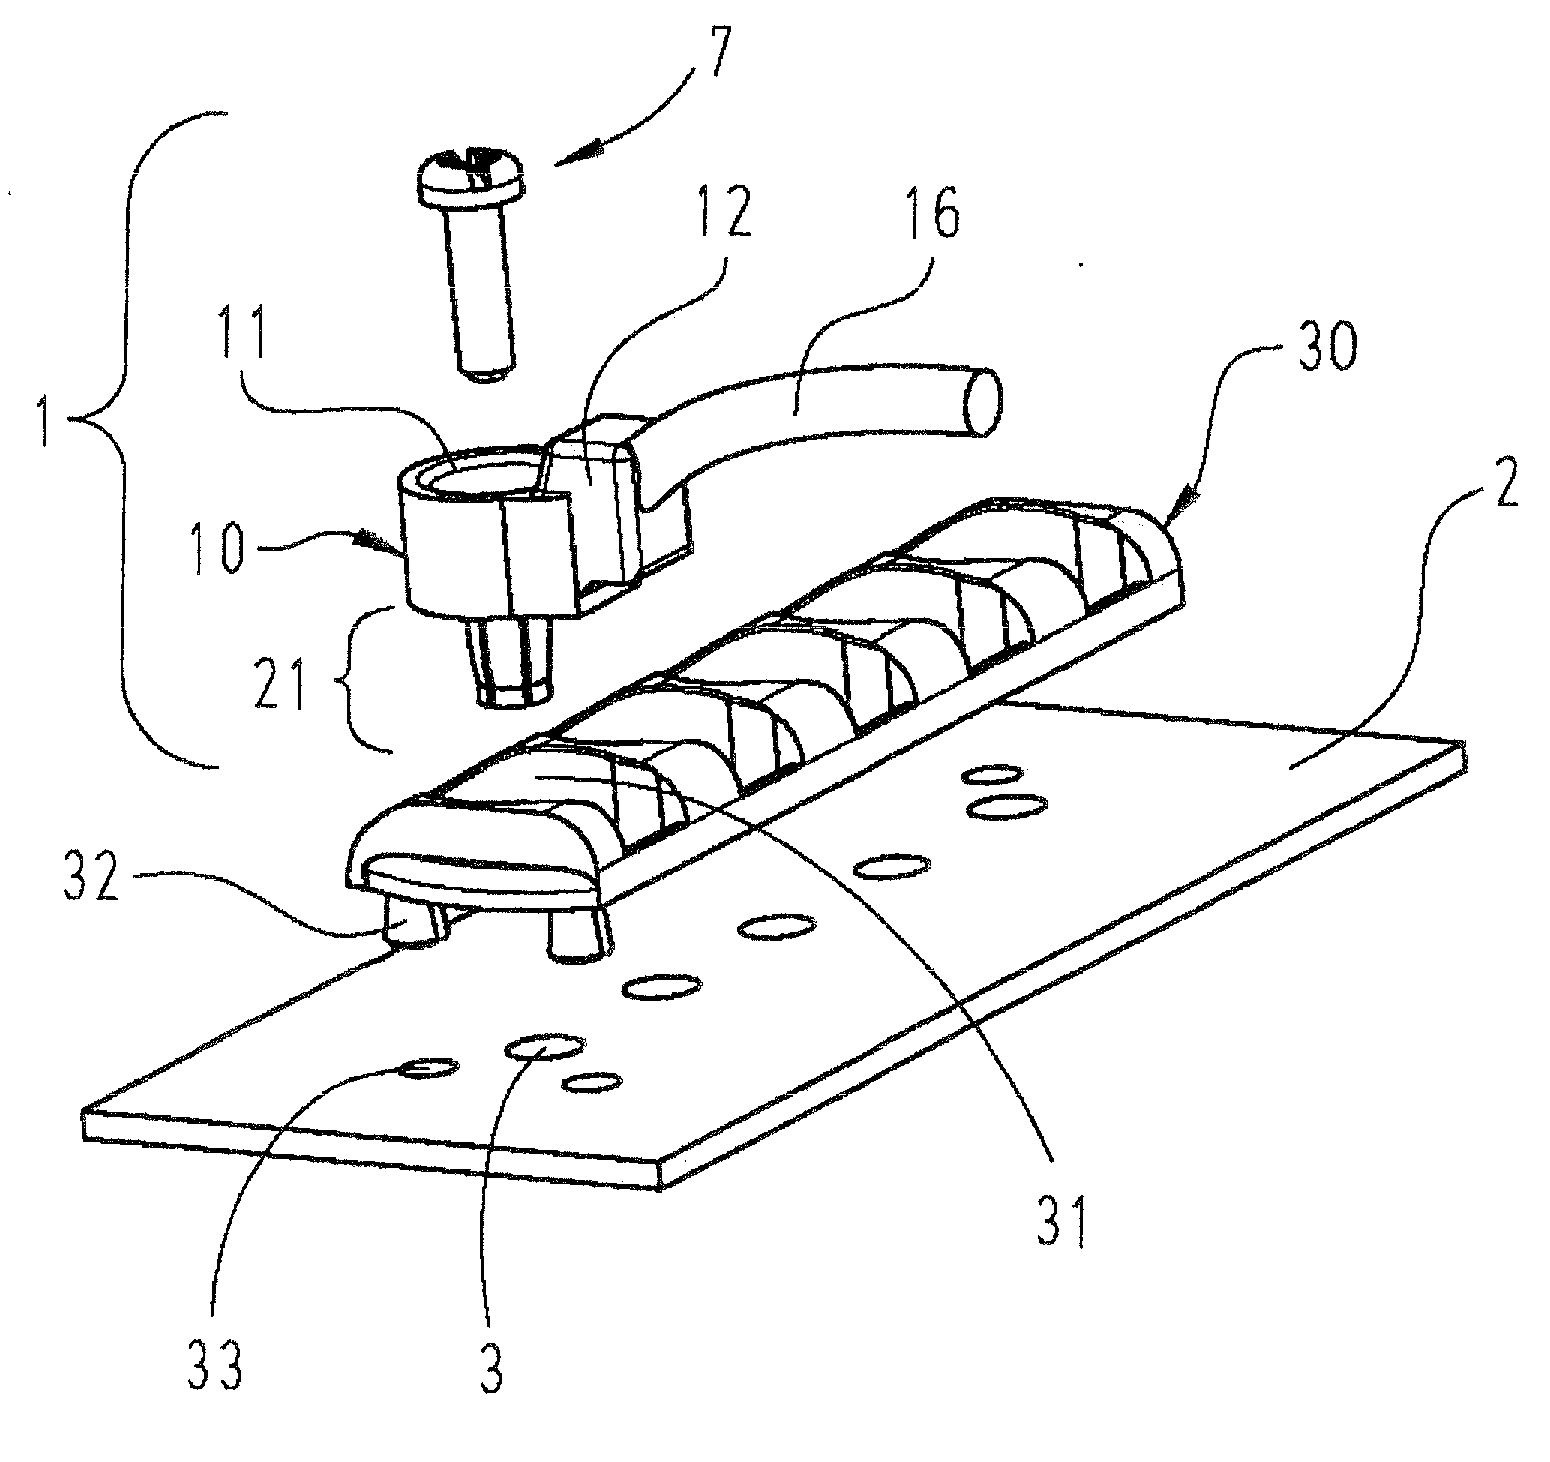 Connecting element for electric conductors with a printed circuit board